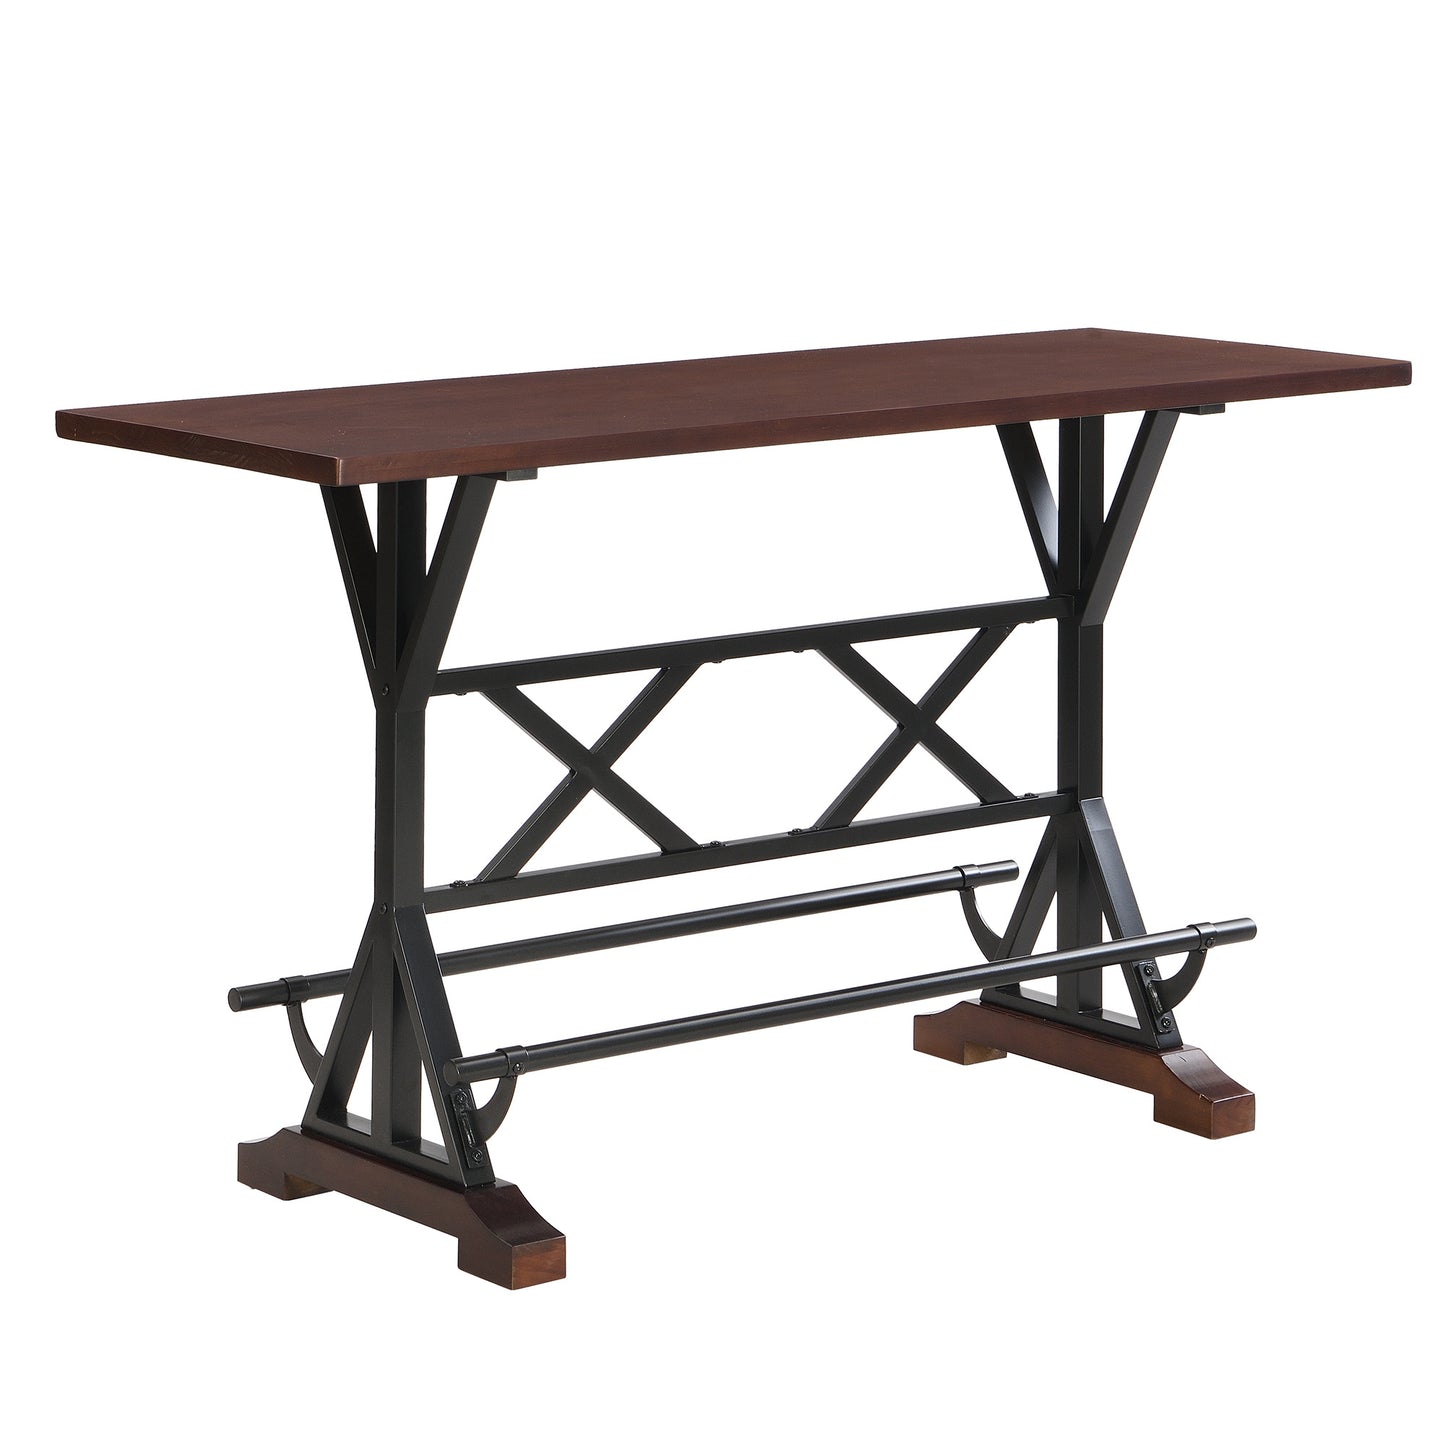 5-piece dining table set, 59" wooden